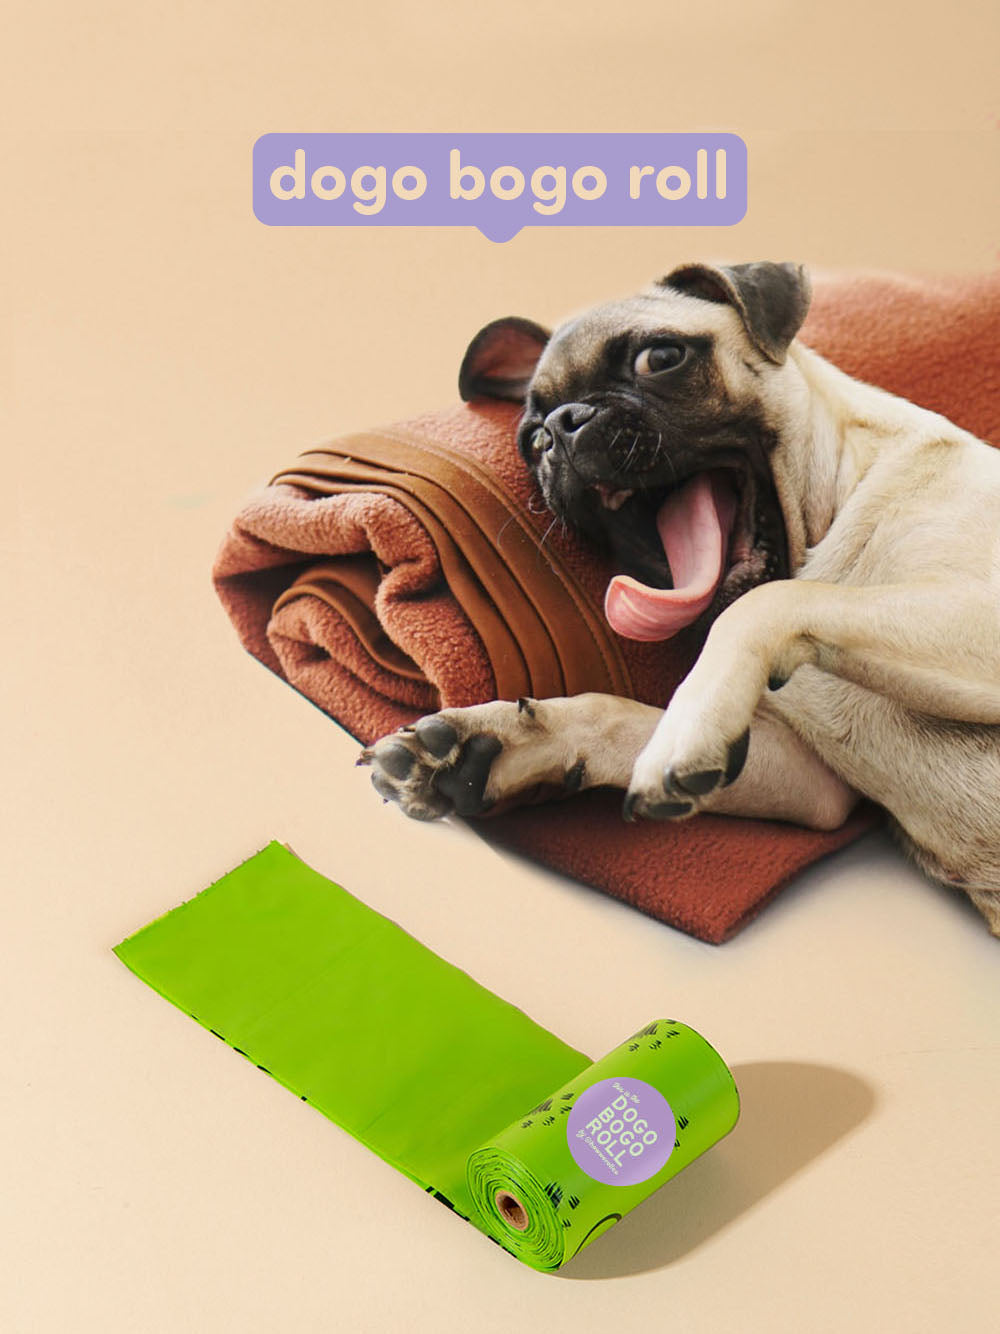 Certified 100% Compostable & Biodegradable Dog Poo Bag Roll - 15 Bags